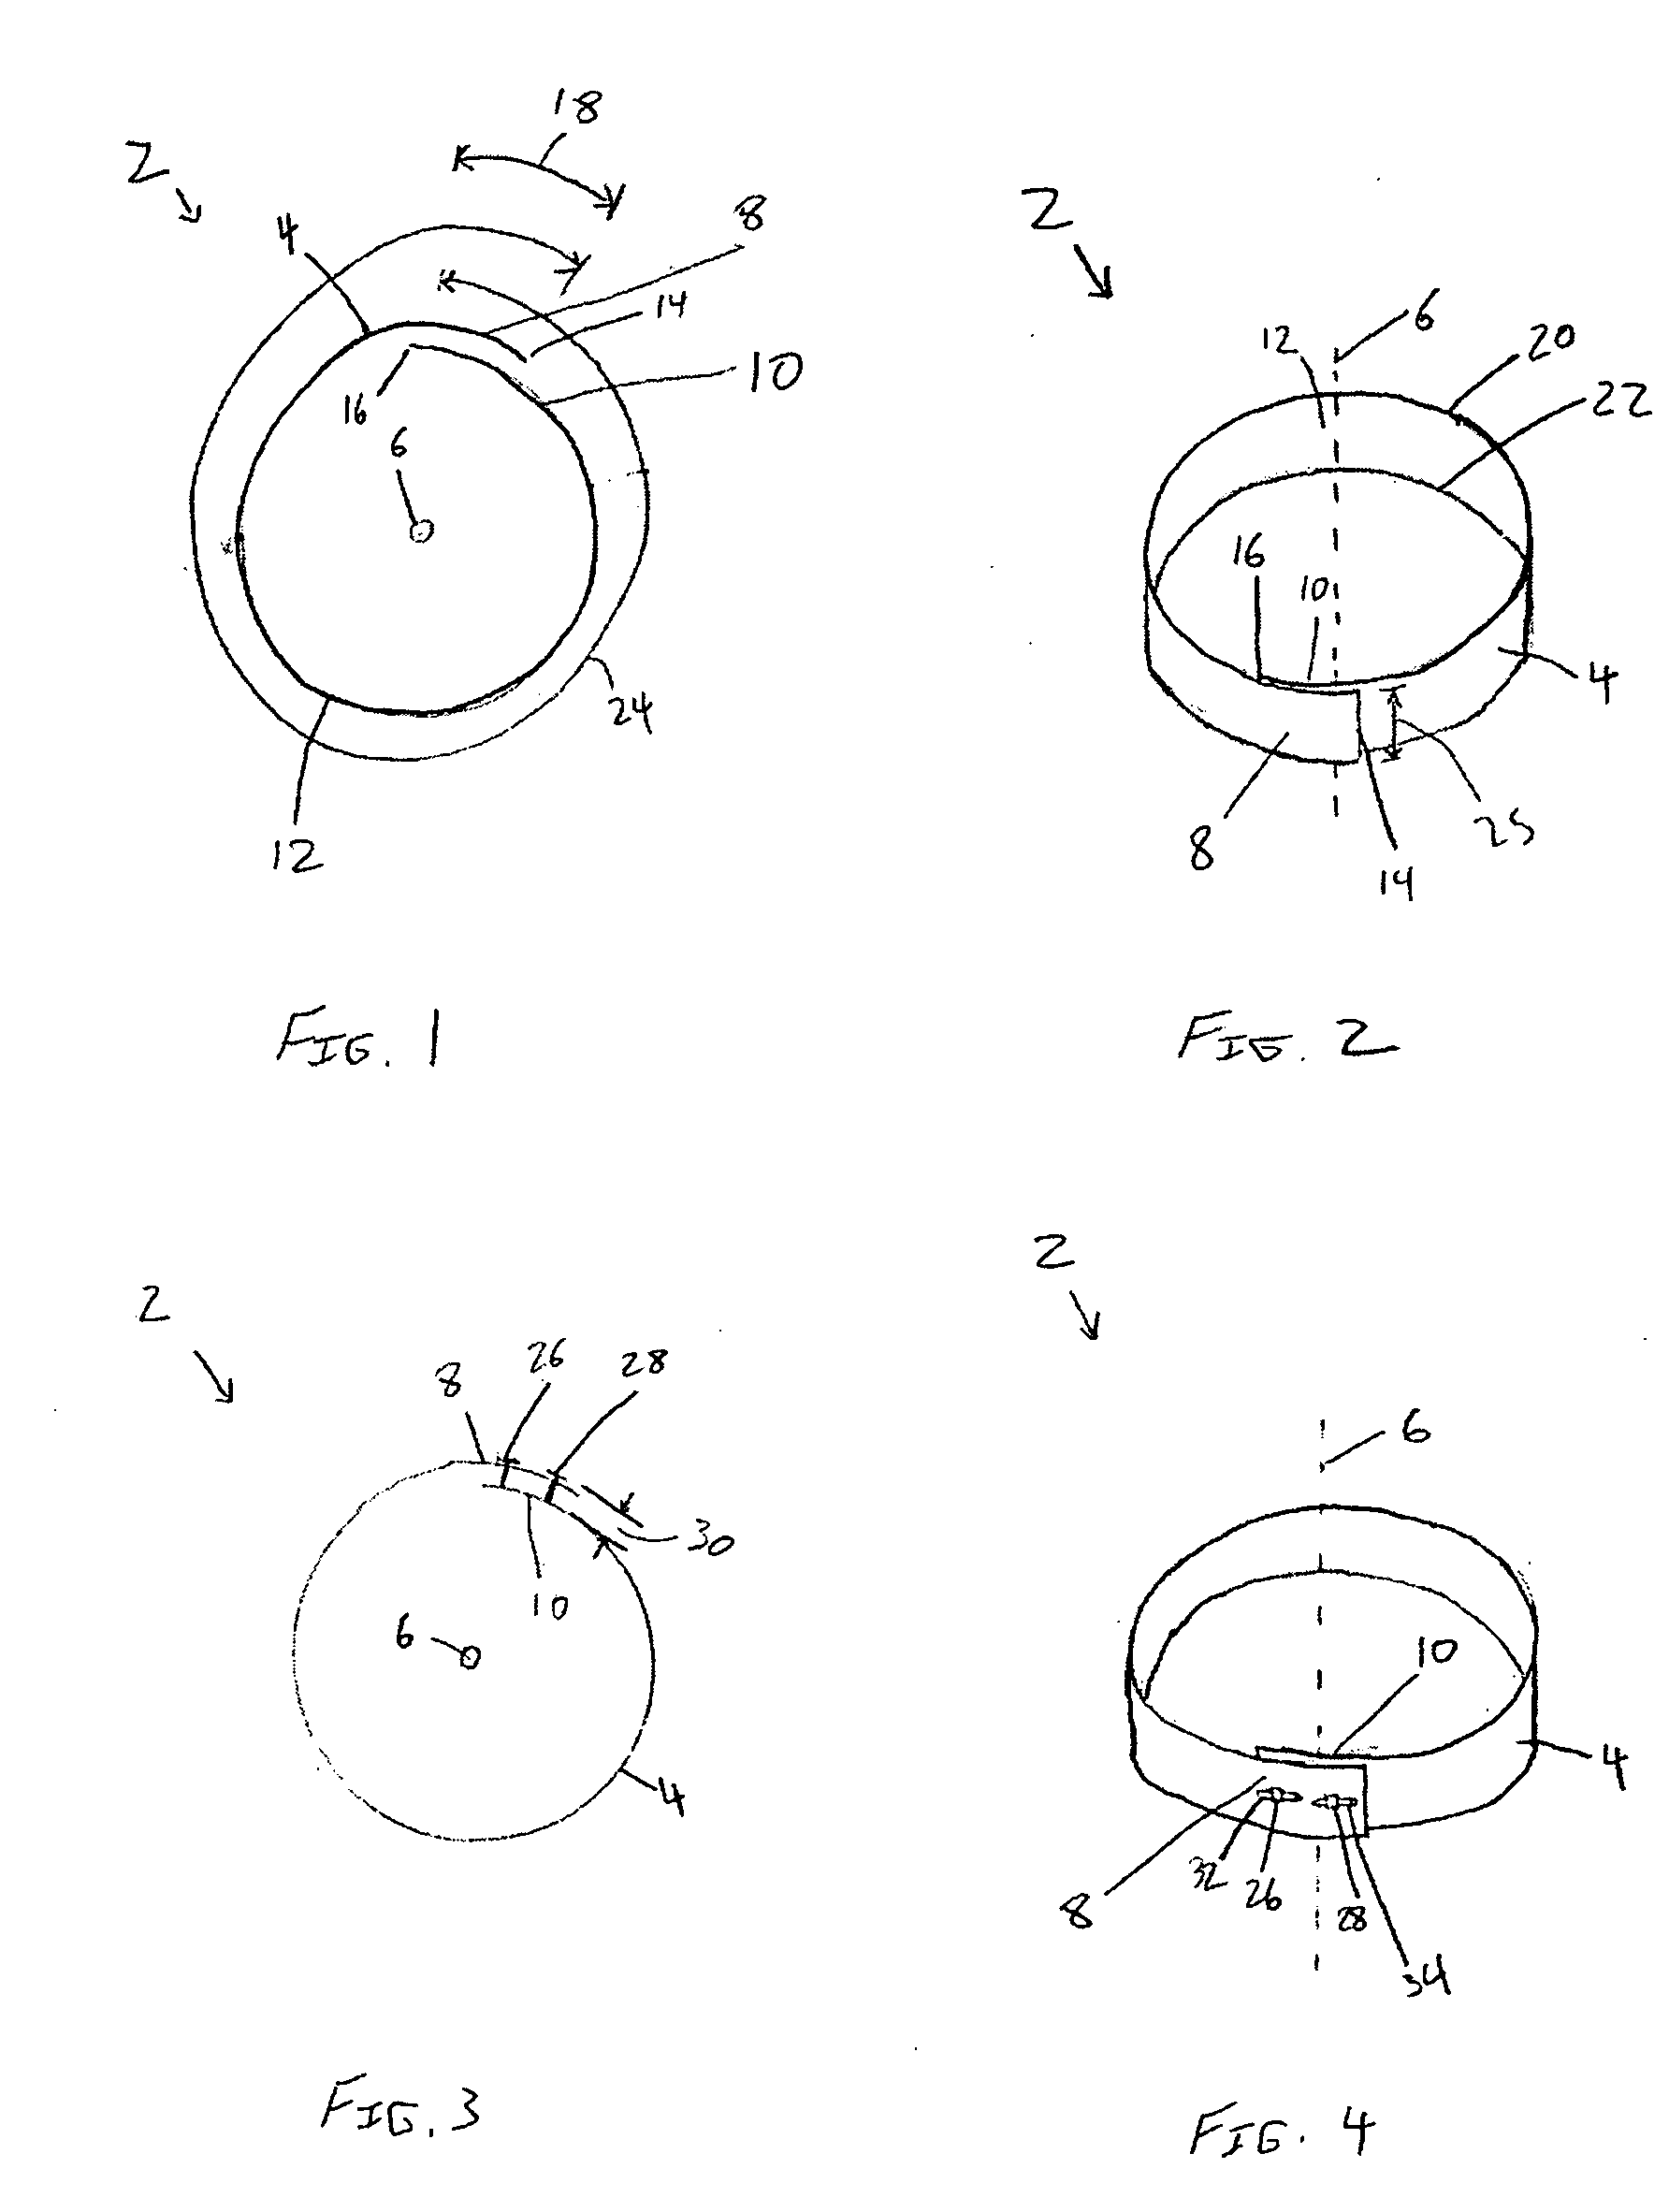 Prosthesis fixturing device and methods of using the same